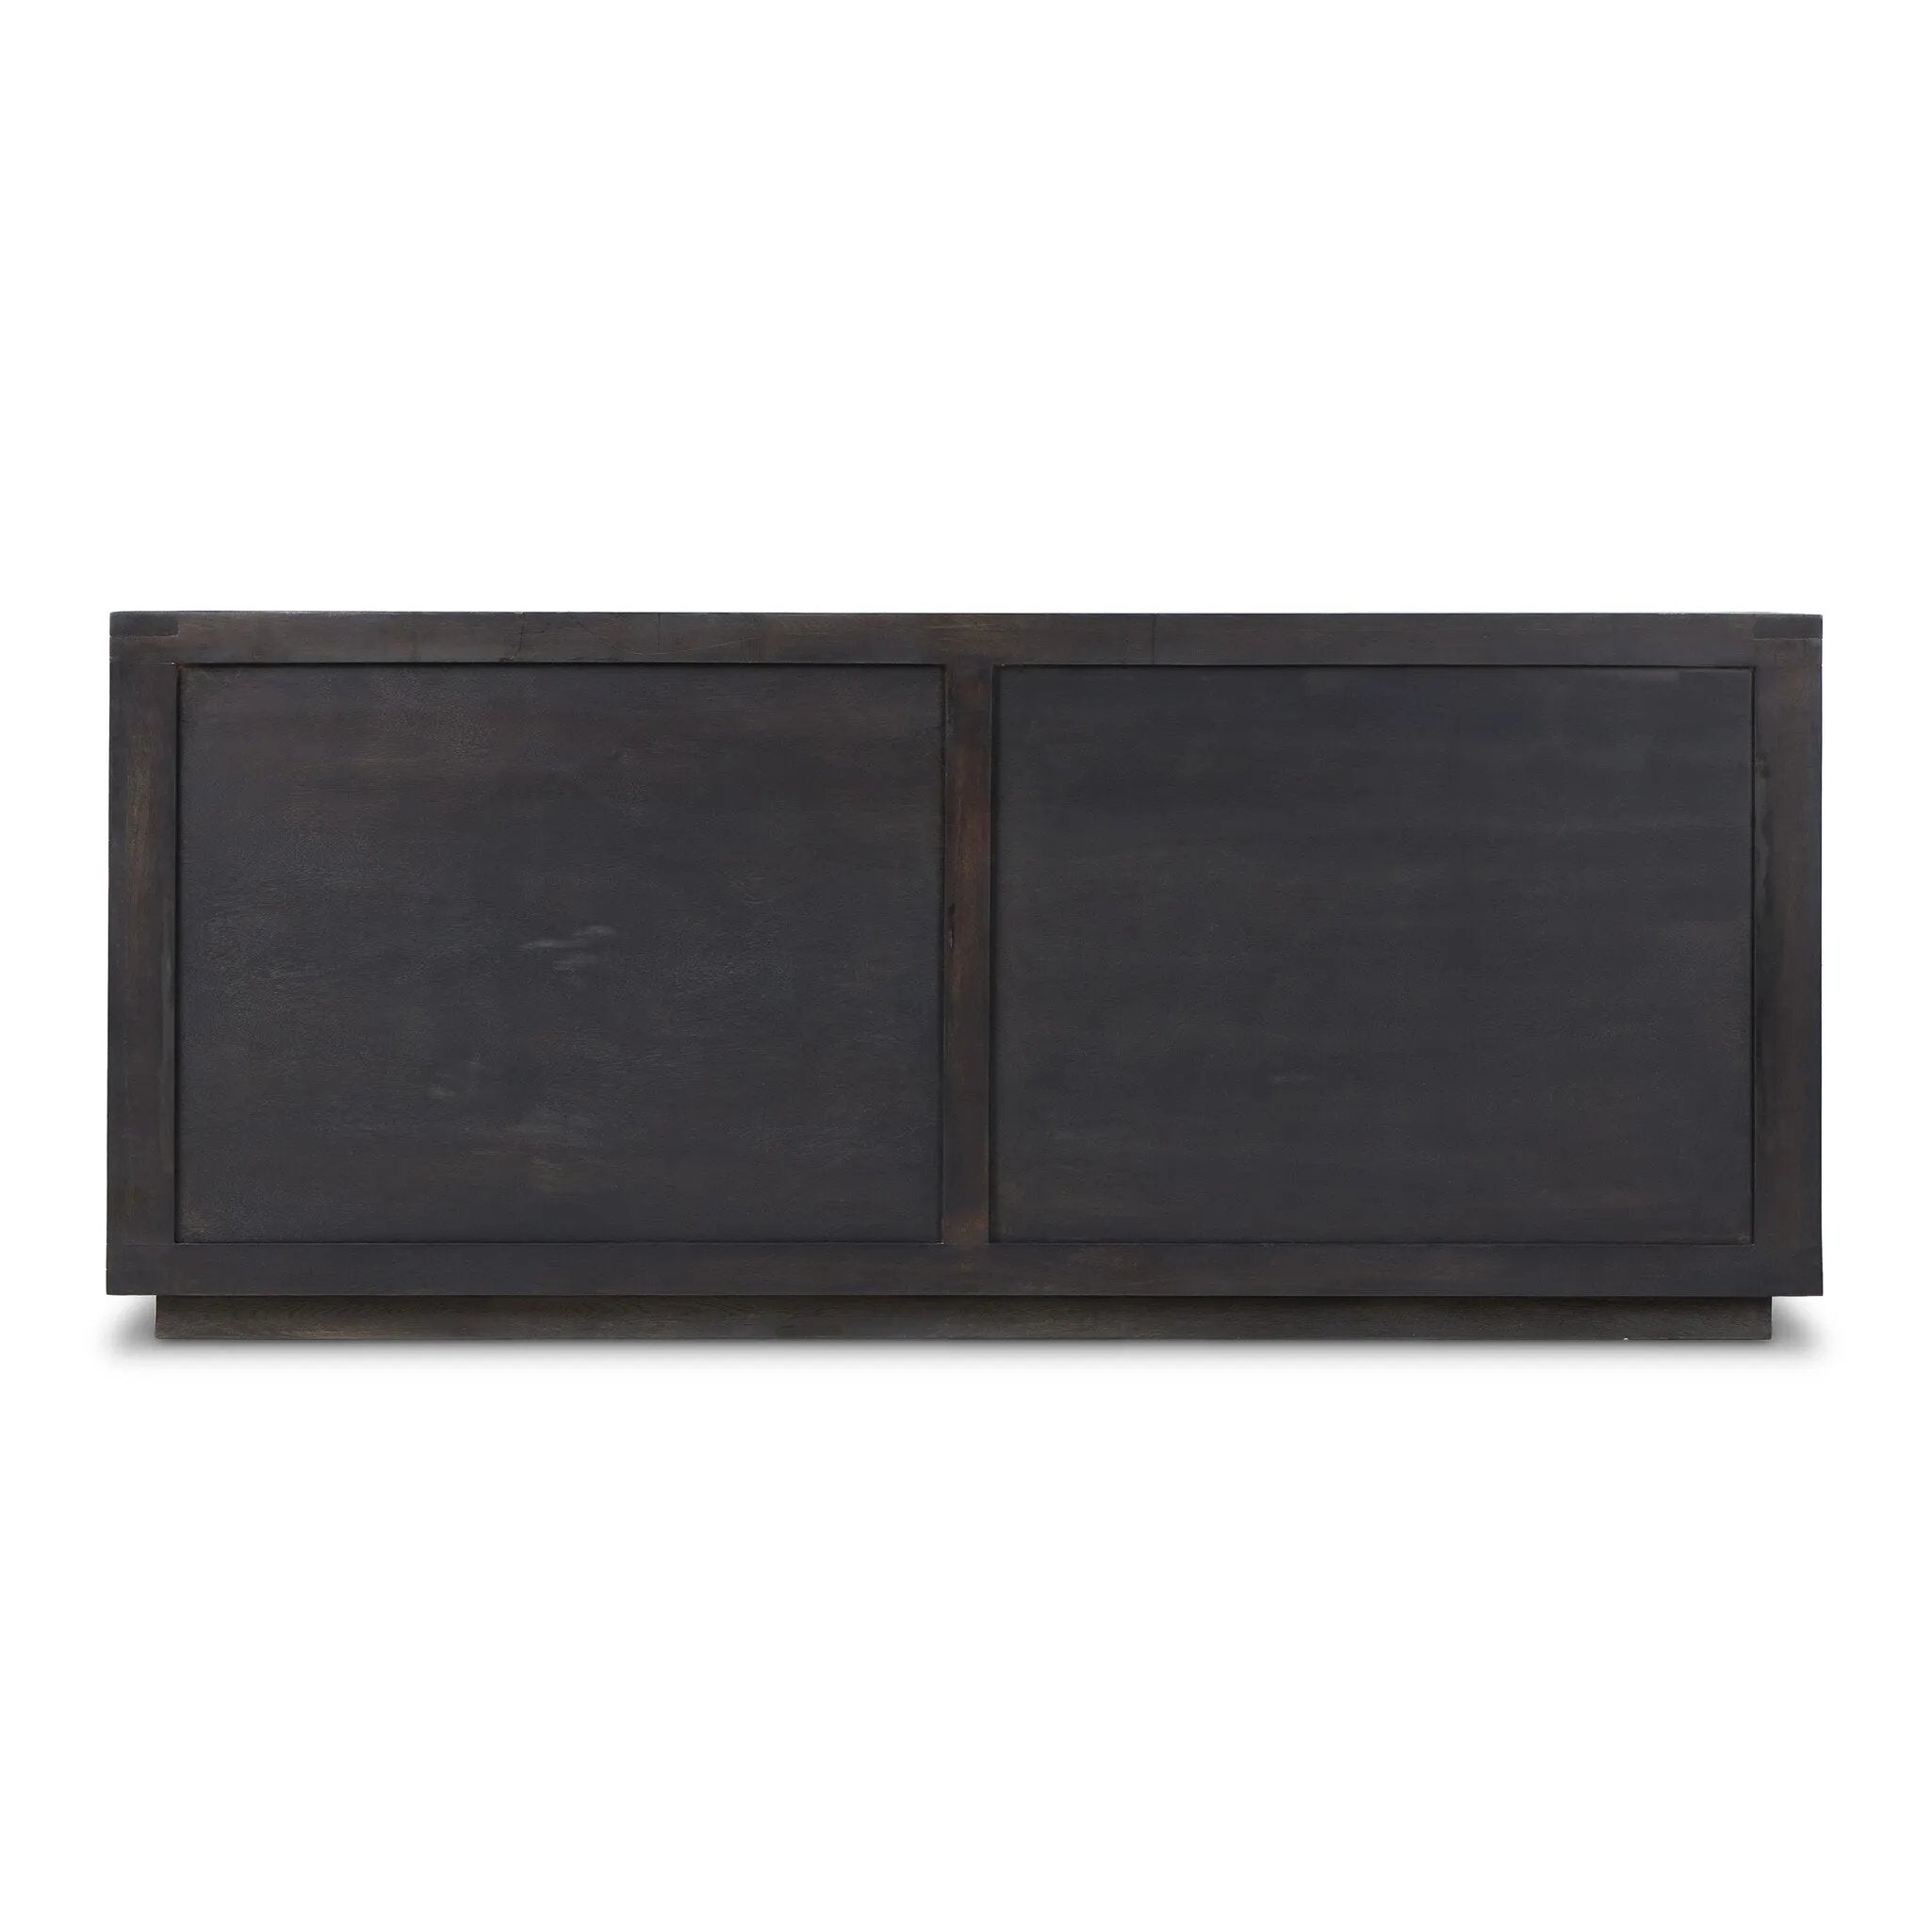 Black-finished oak shapes a streamlined box-style dresser, with lap joint corners for a detail-driven touch.Collection: Bennet Amethyst Home provides interior design, new home construction design consulting, vintage area rugs, and lighting in the Los Angeles metro area.